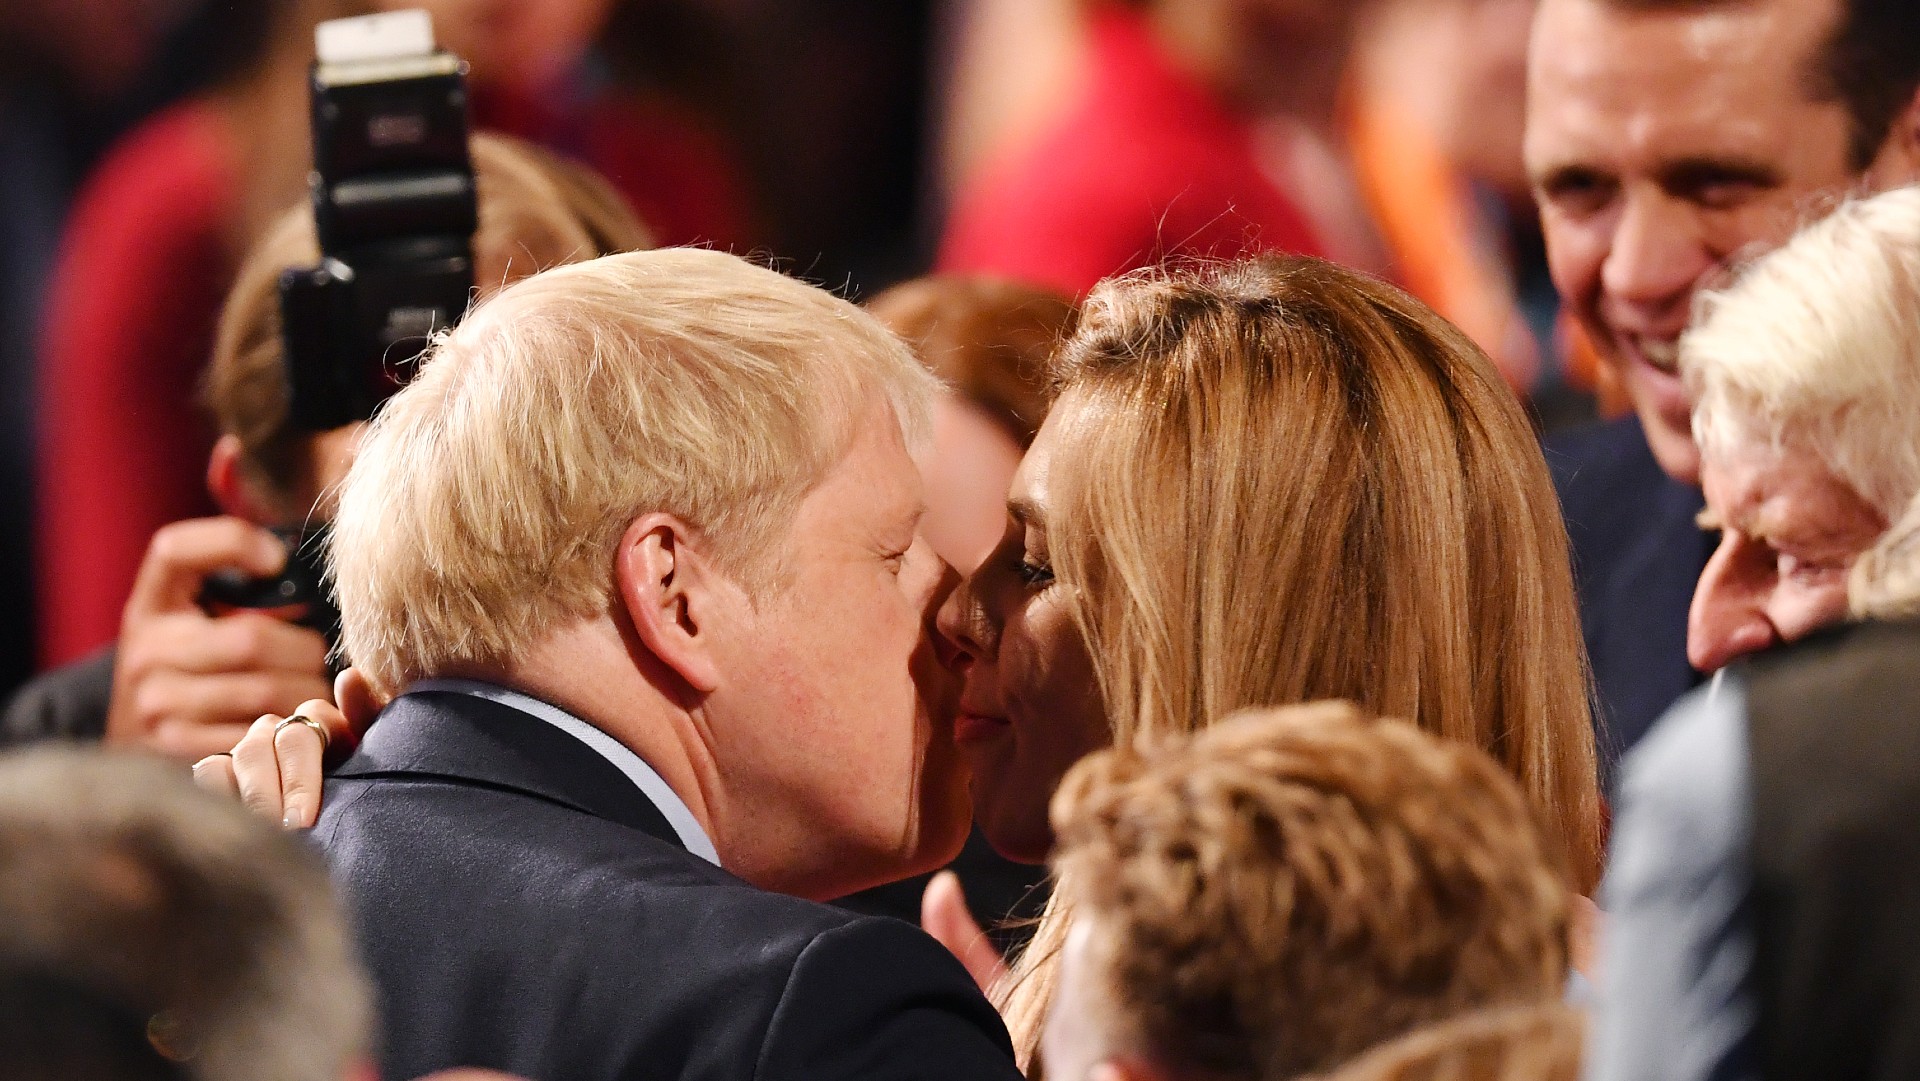 The prime minister kisses his then girlfriend Carrie Symonds